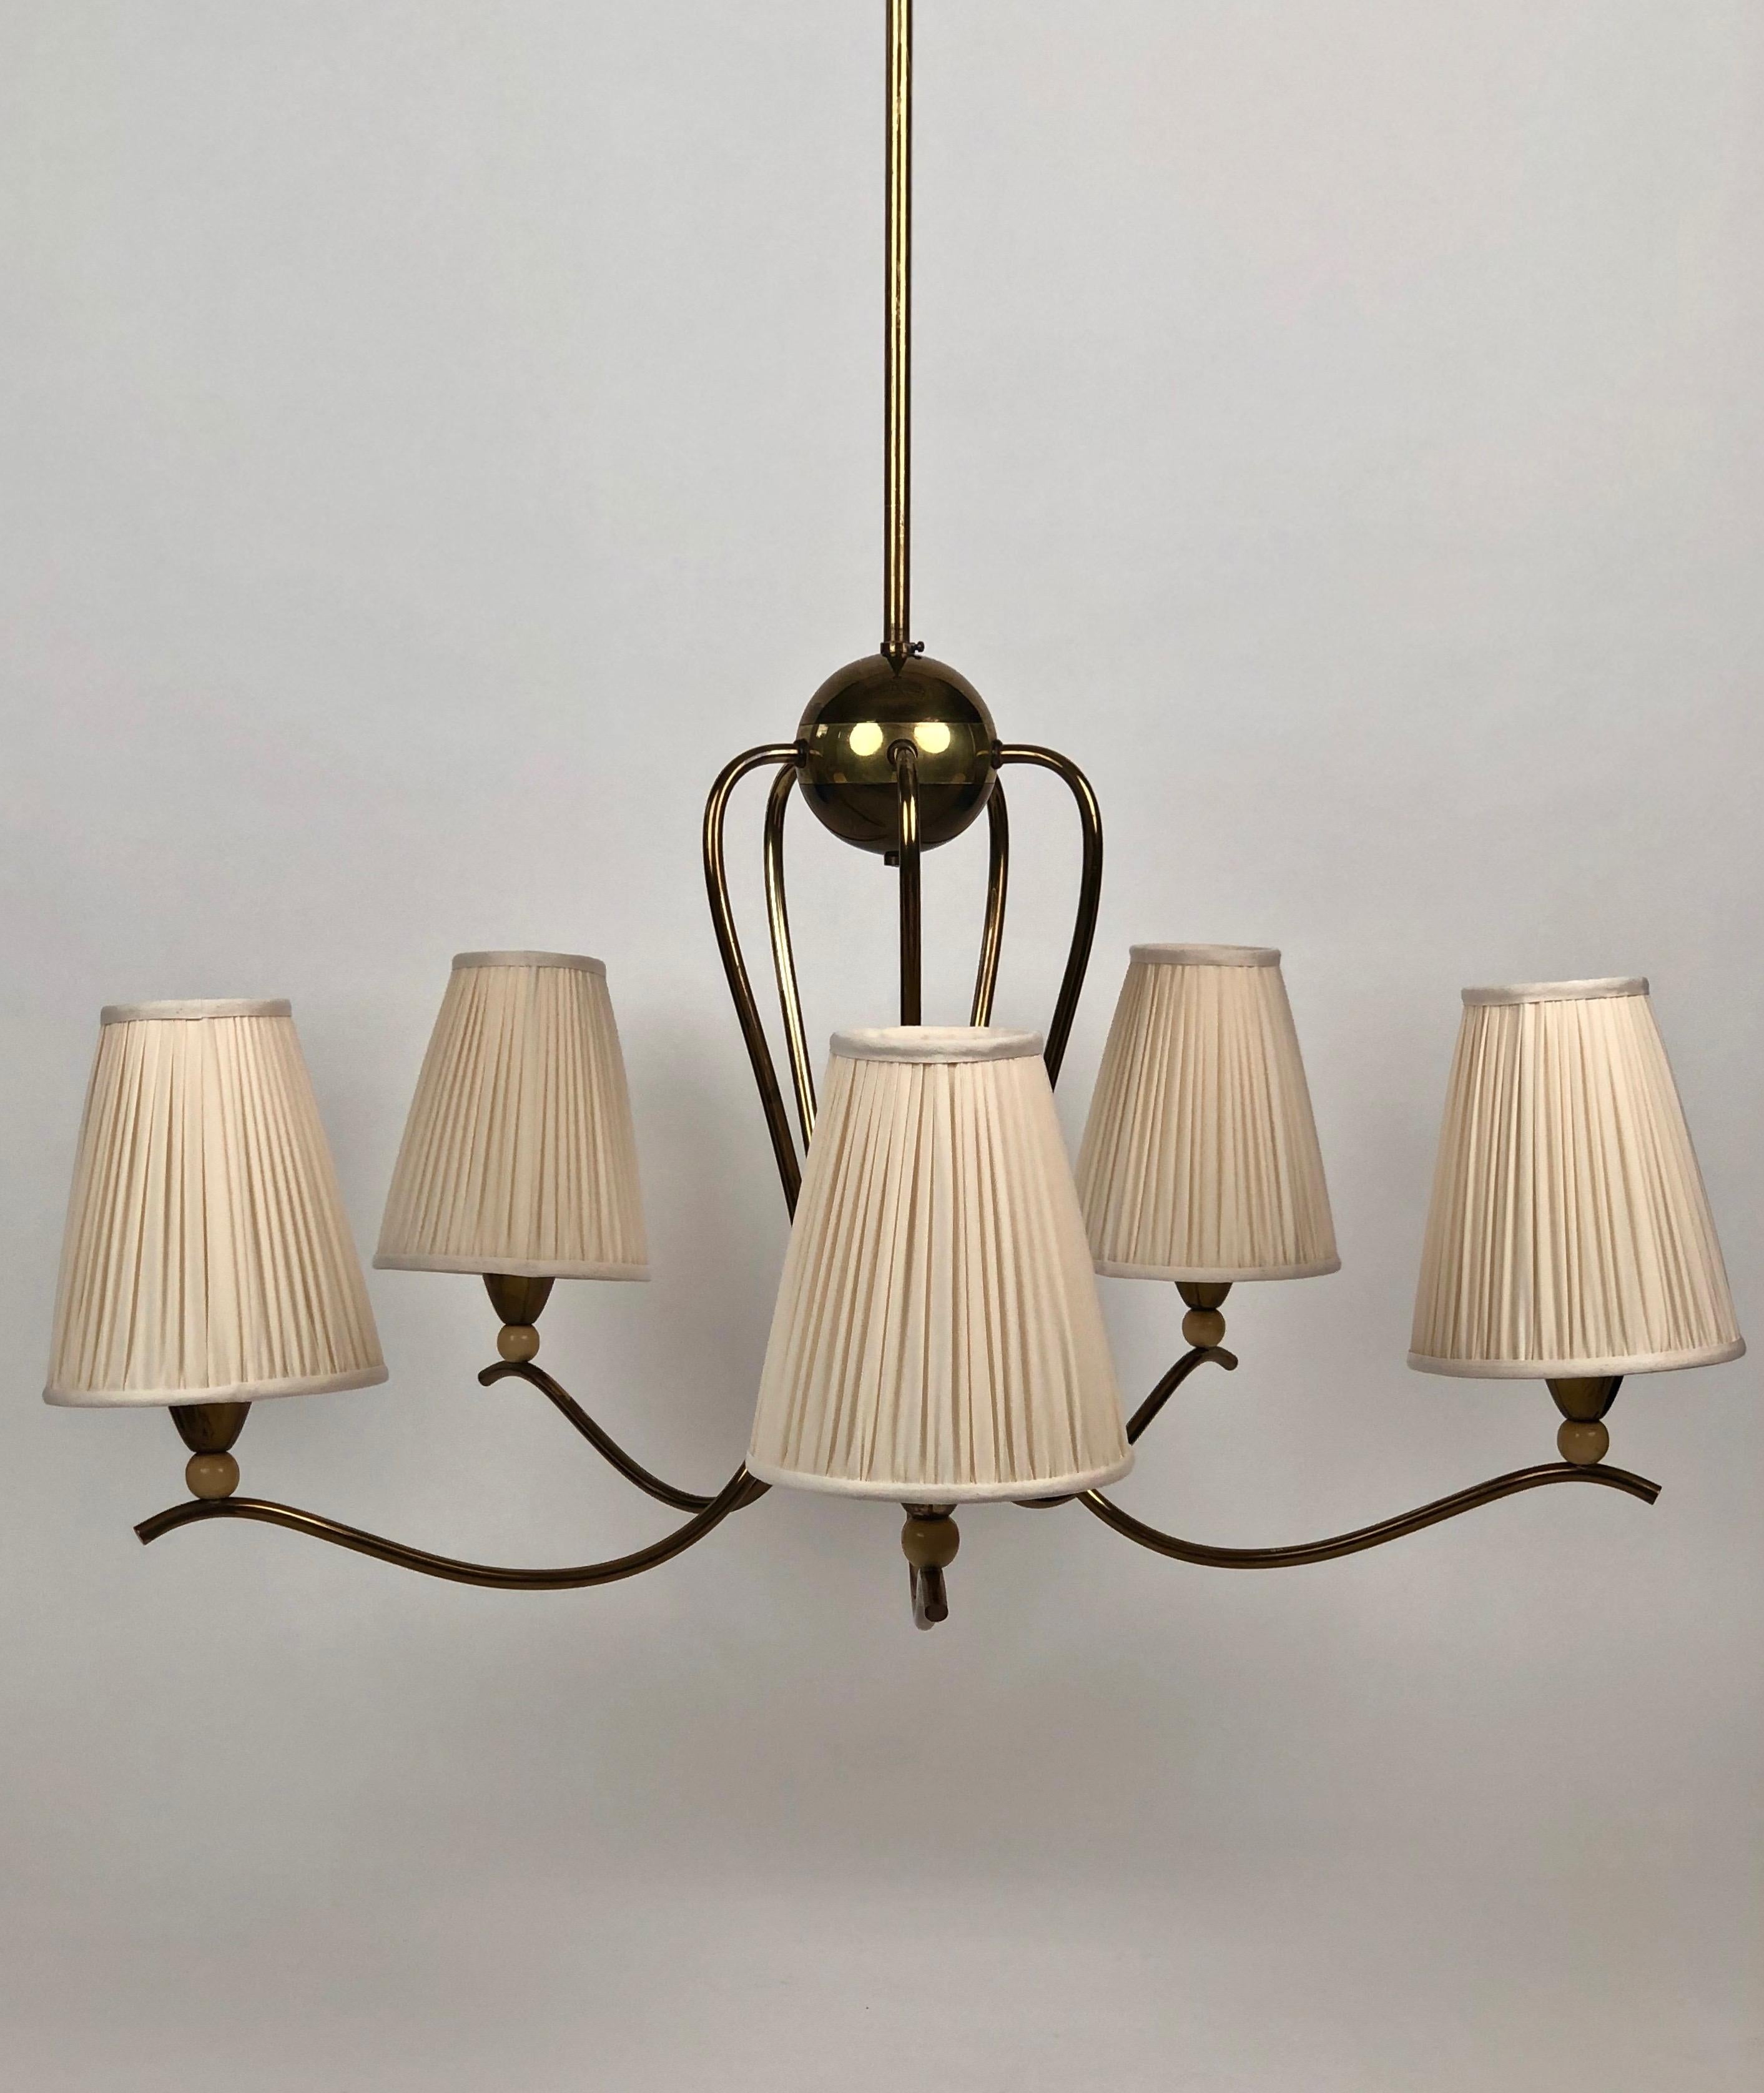 Modern Five Arms Chandelier in Brass & Wood with Silk Shades from Josef Frank, Austria